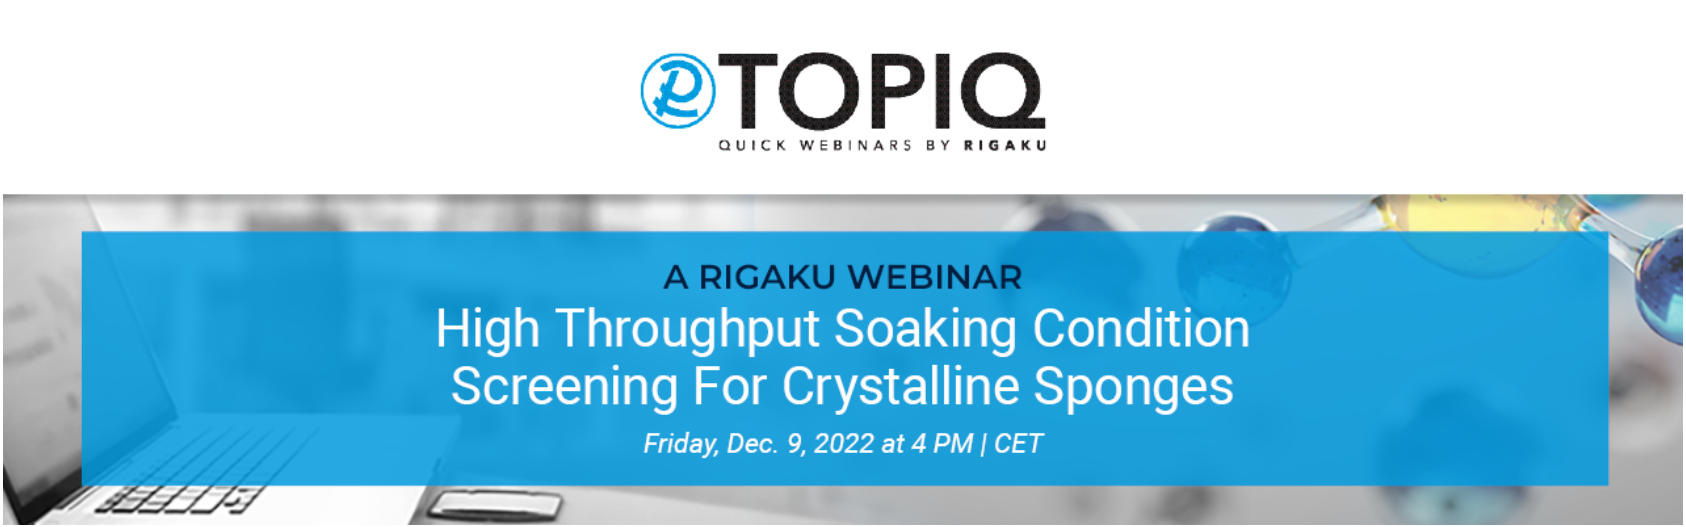 High Throughput Soaking Condition Screening For Crystalline Sponges